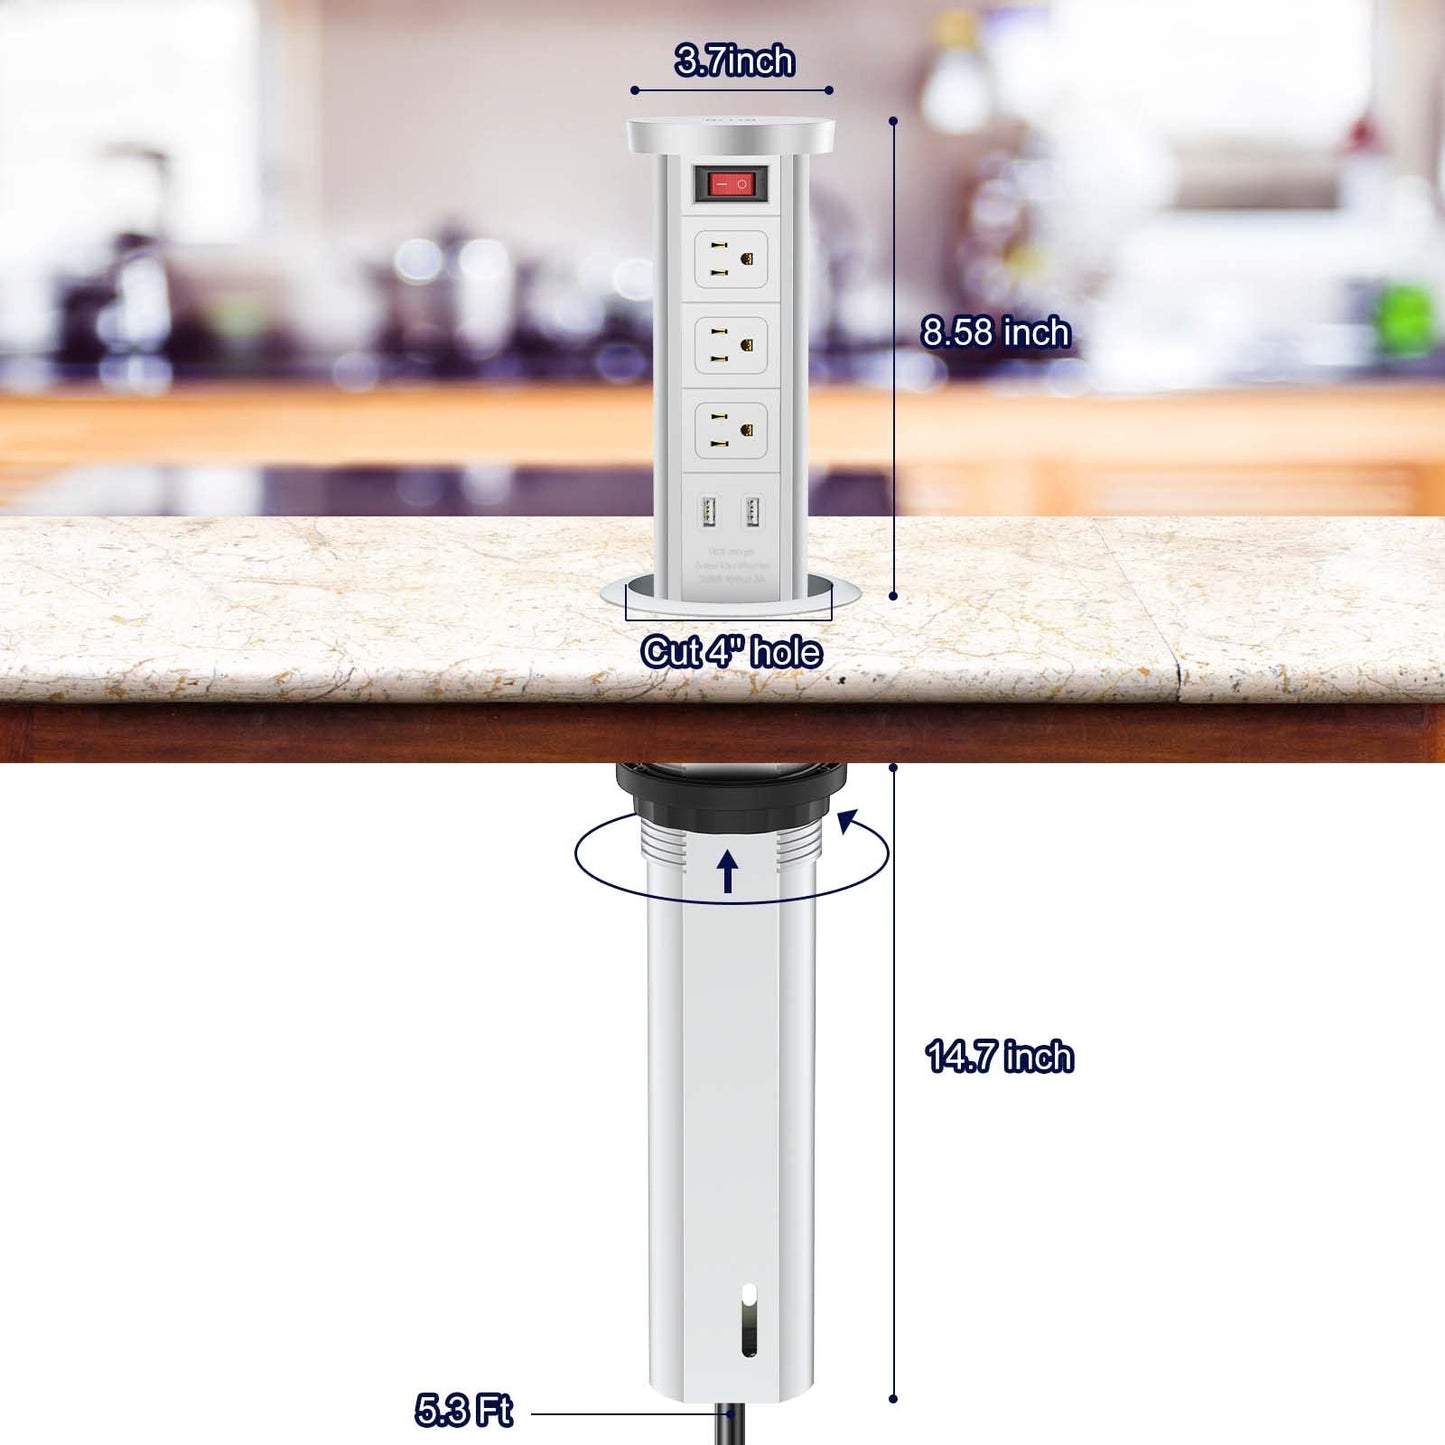 Automatic Raising Power Strip Wireless Charging Stations